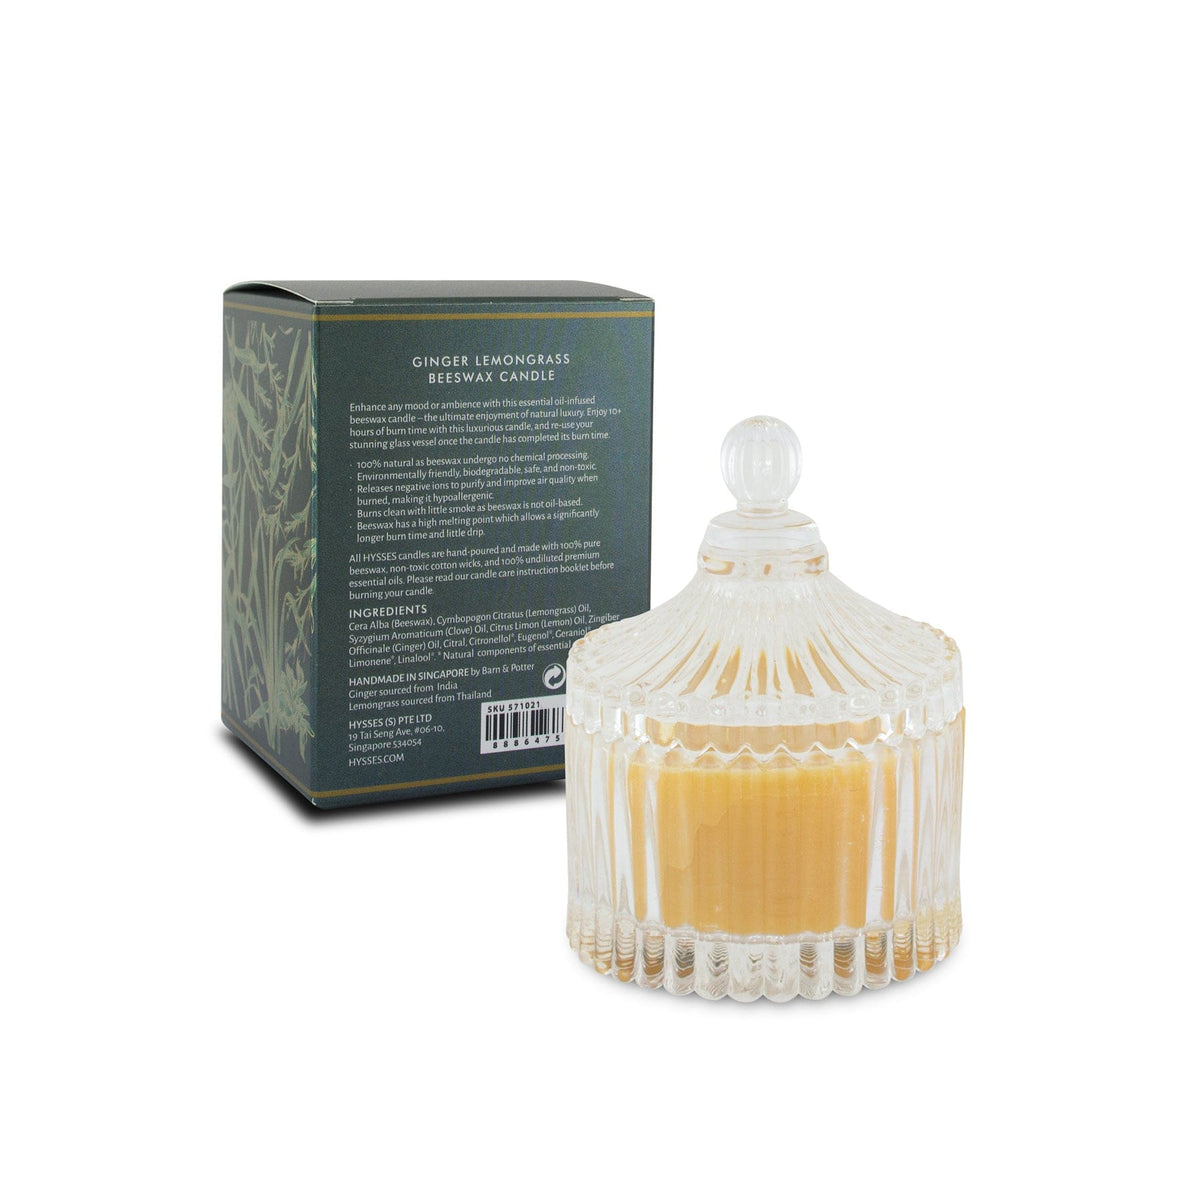 Hysses Home Scents Beeswax Candle Ginger Lemongrass